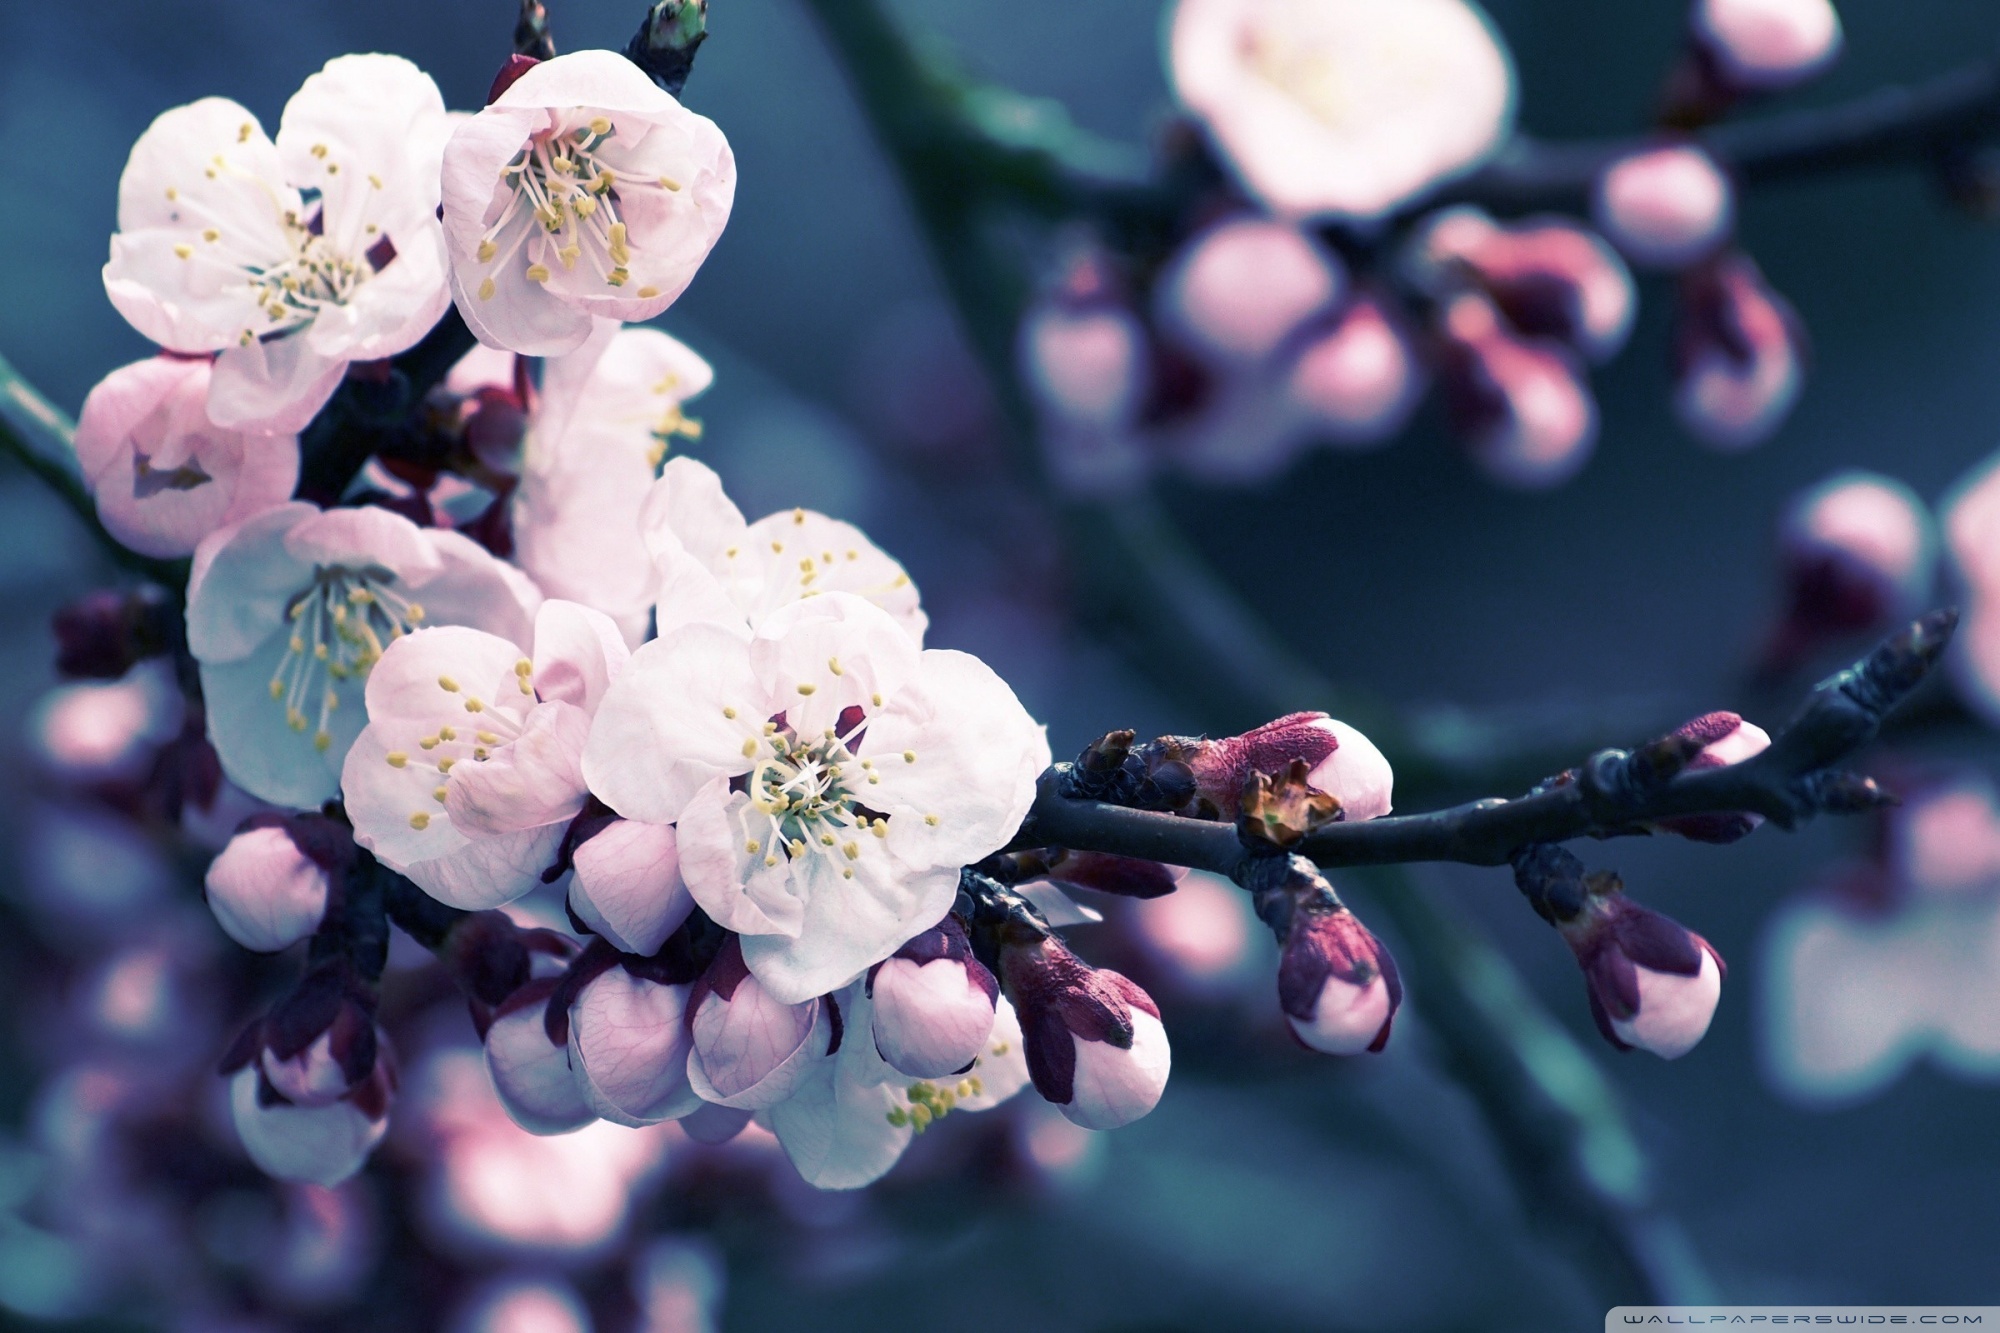 Close up Of Cherry Blossom Ultra HD Desktop Background Wallpaper for 4K UHD TV, Multi Display, Dual Monitor, Tablet